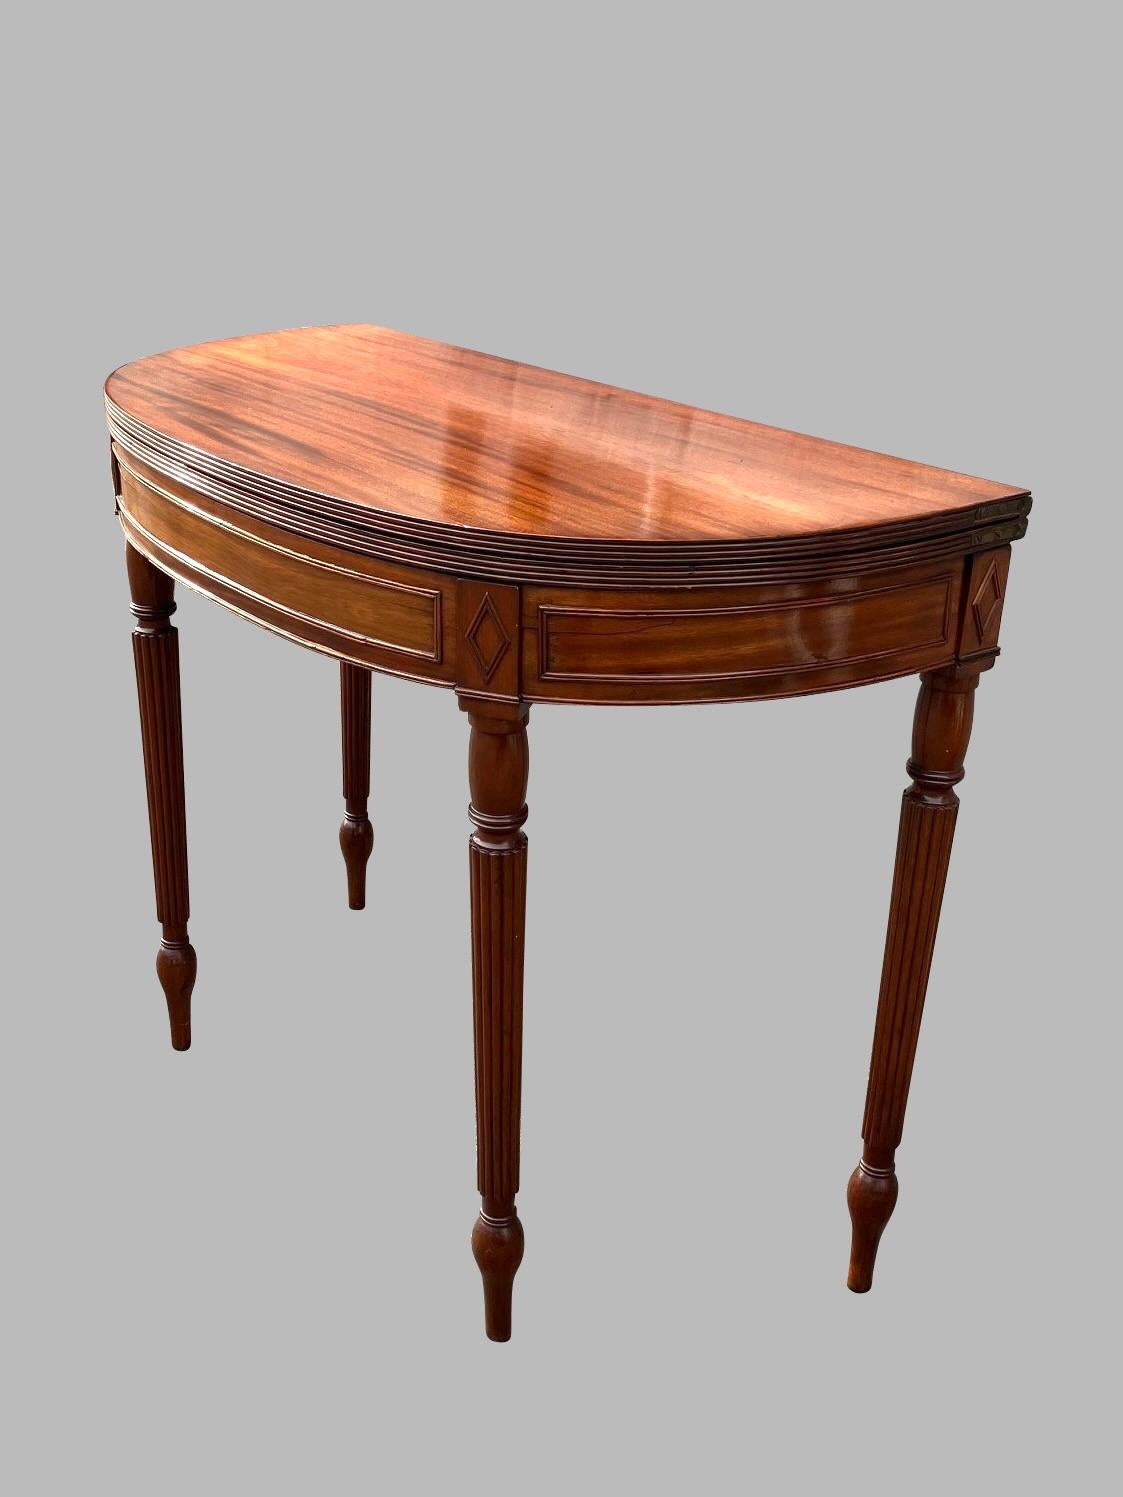 English Regency Period Mahogany Flip Top Game or Tea Table with Reeded Legs For Sale 3